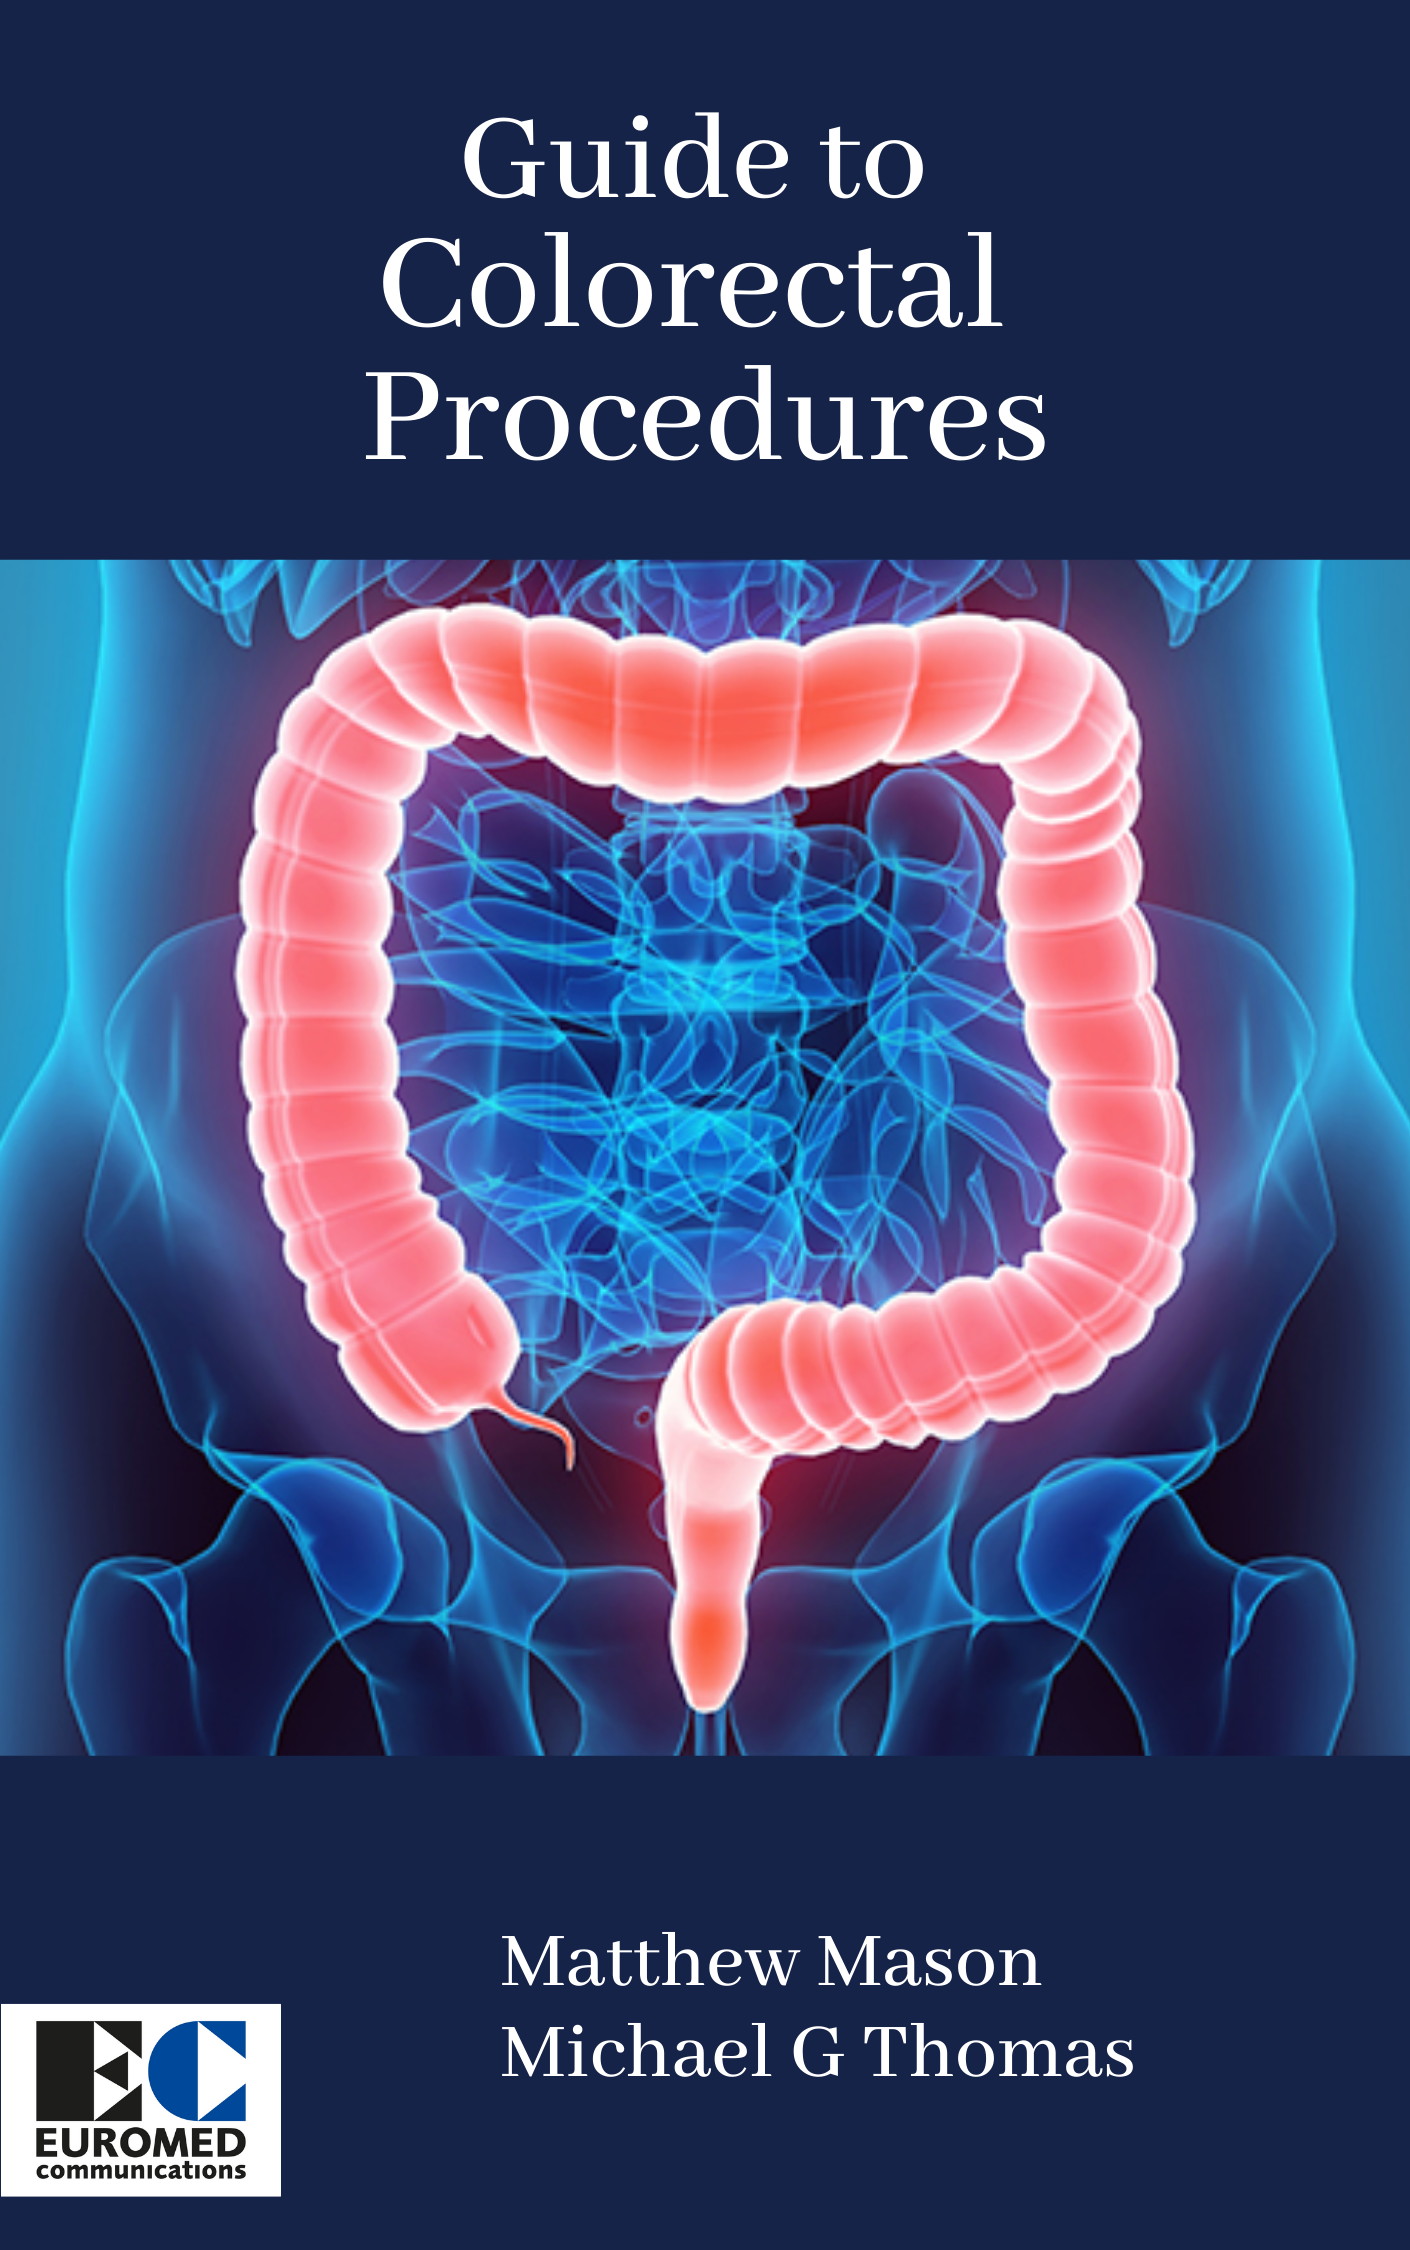 Guide to Colorectal Procedures